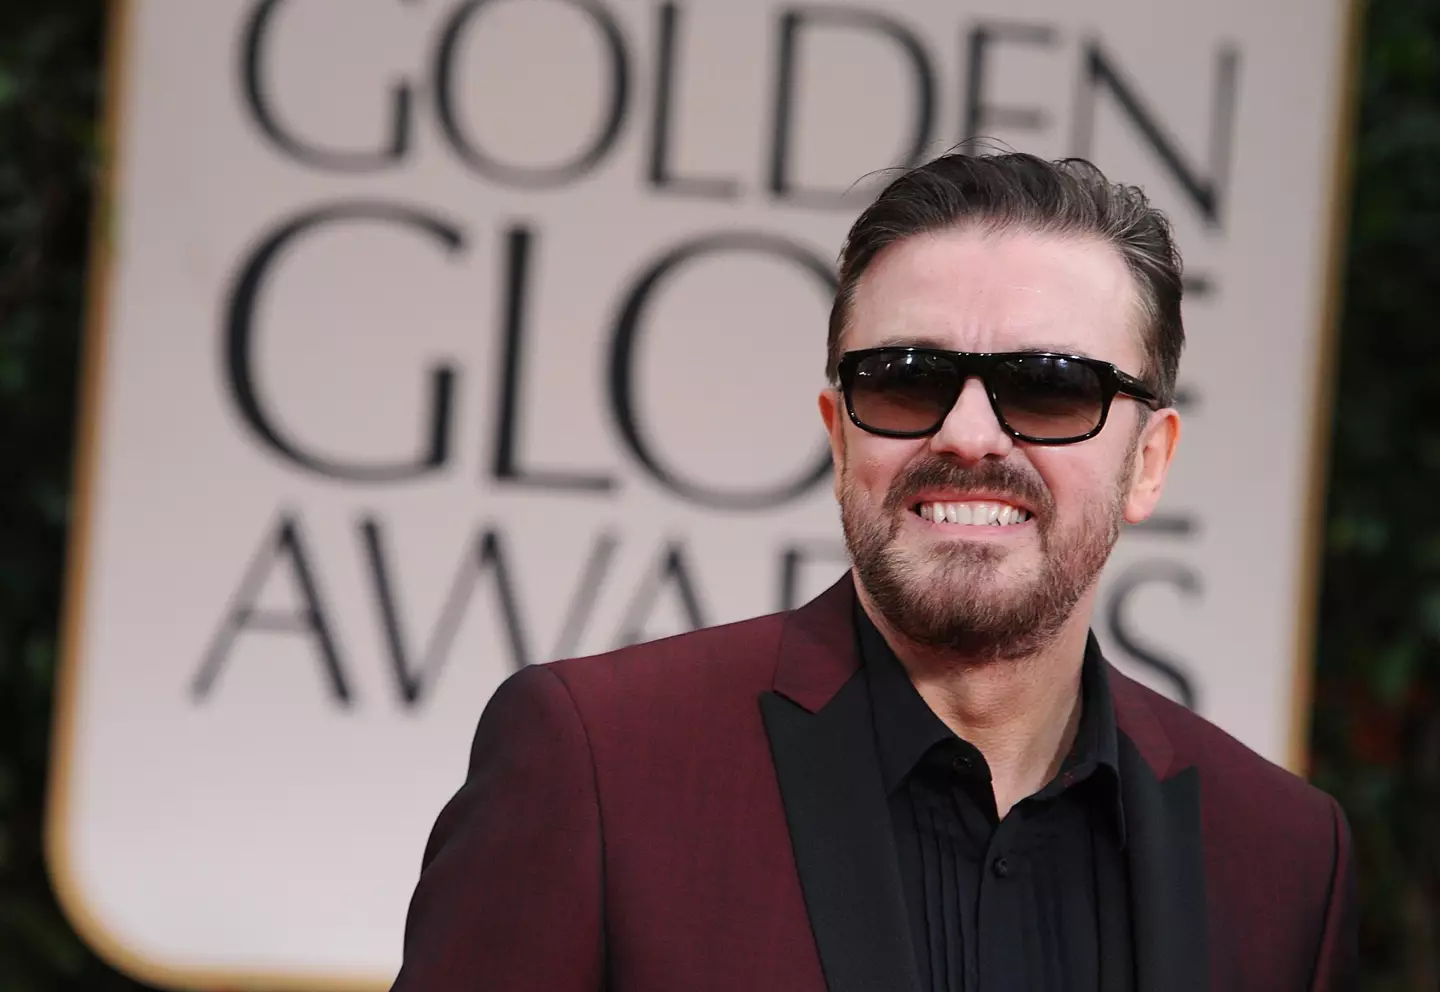 Ricky Gervais took shots at numerous celebrities in his monologues.